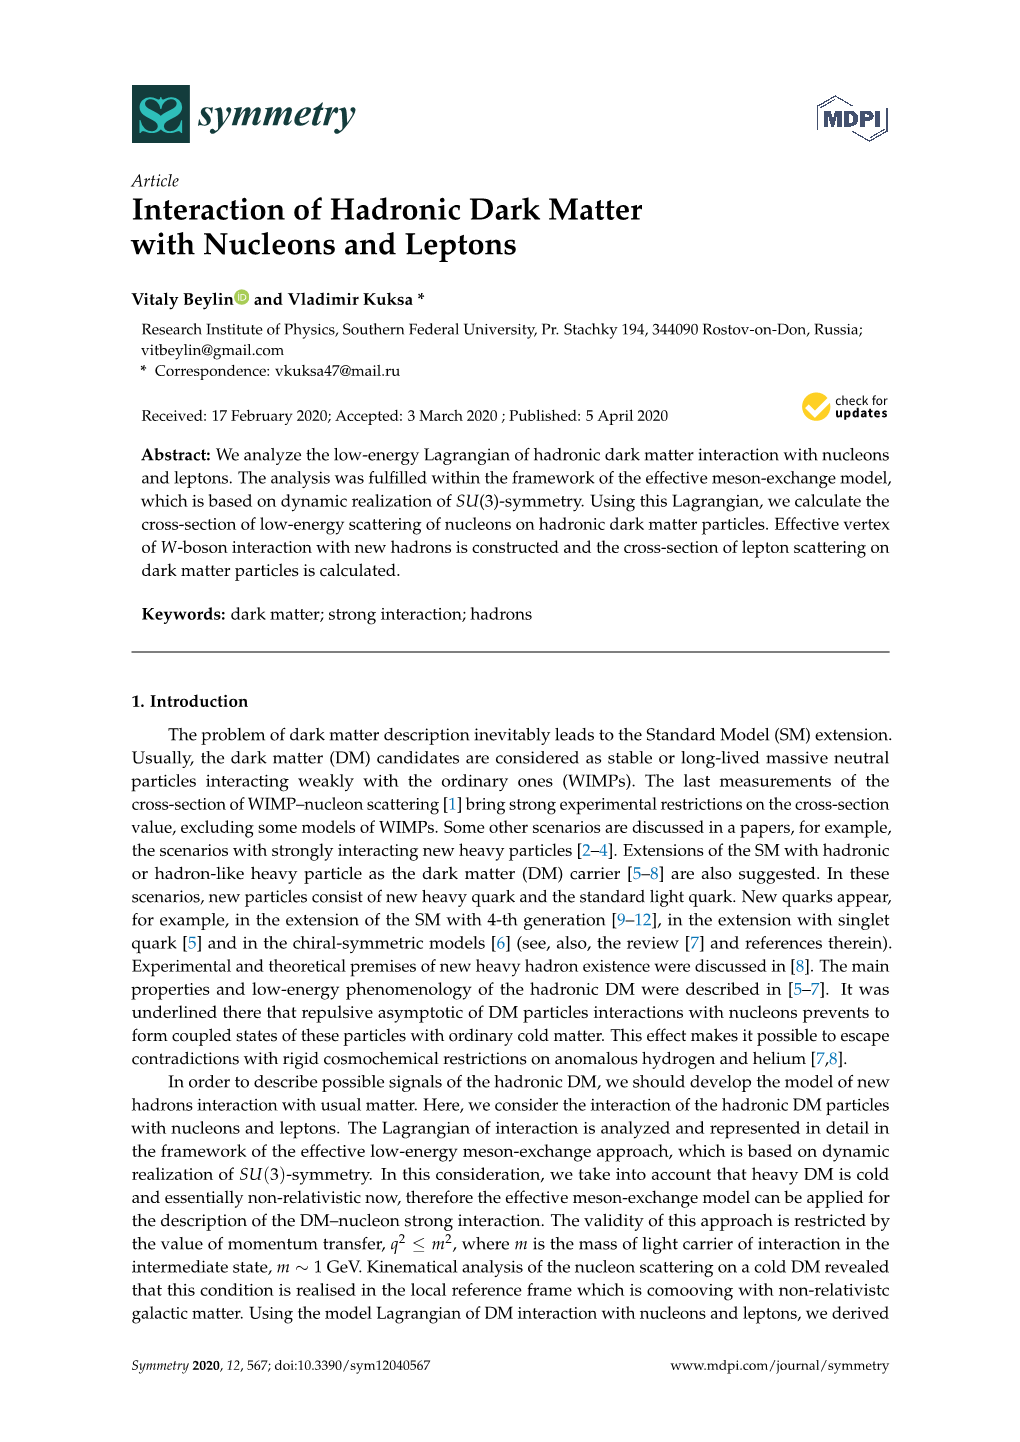 Interaction of Hadronic Dark Matter with Nucleons and Leptons